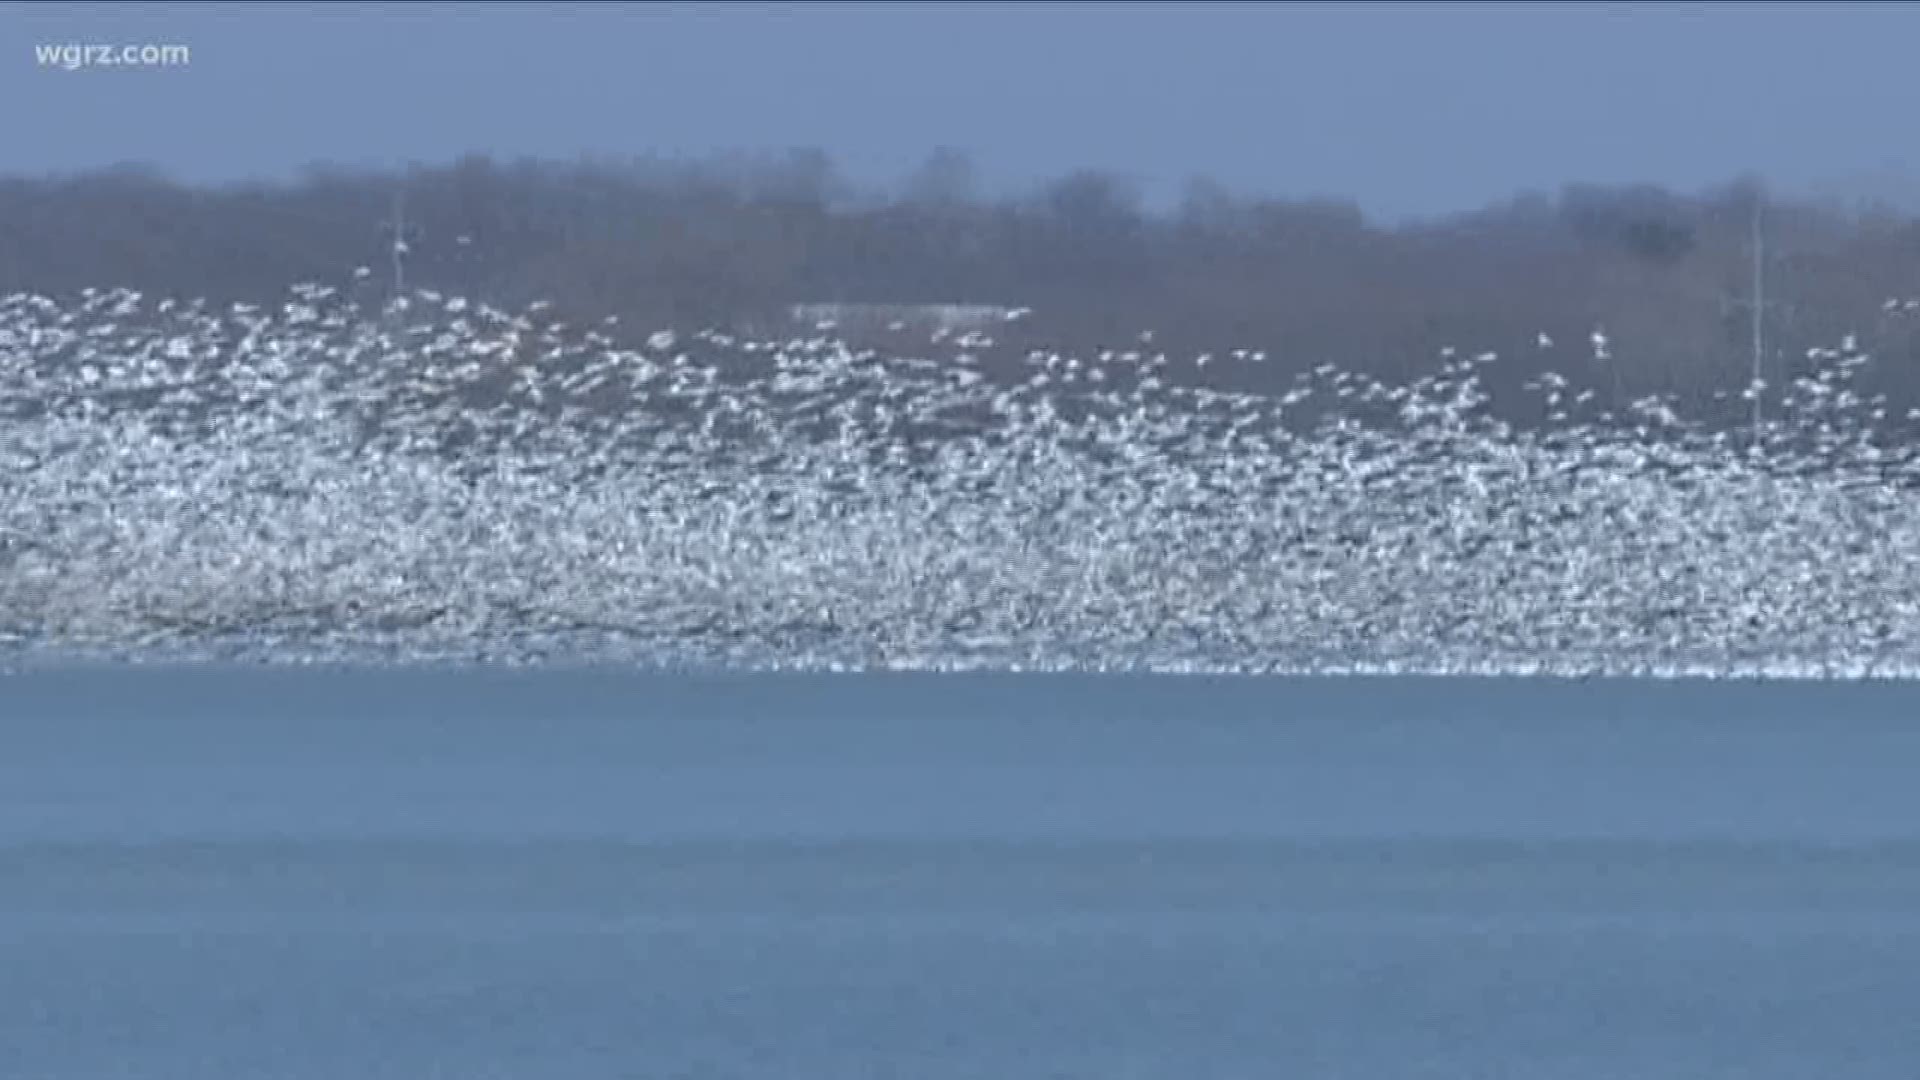 Millions of birds migrate through the wetlands each spring.